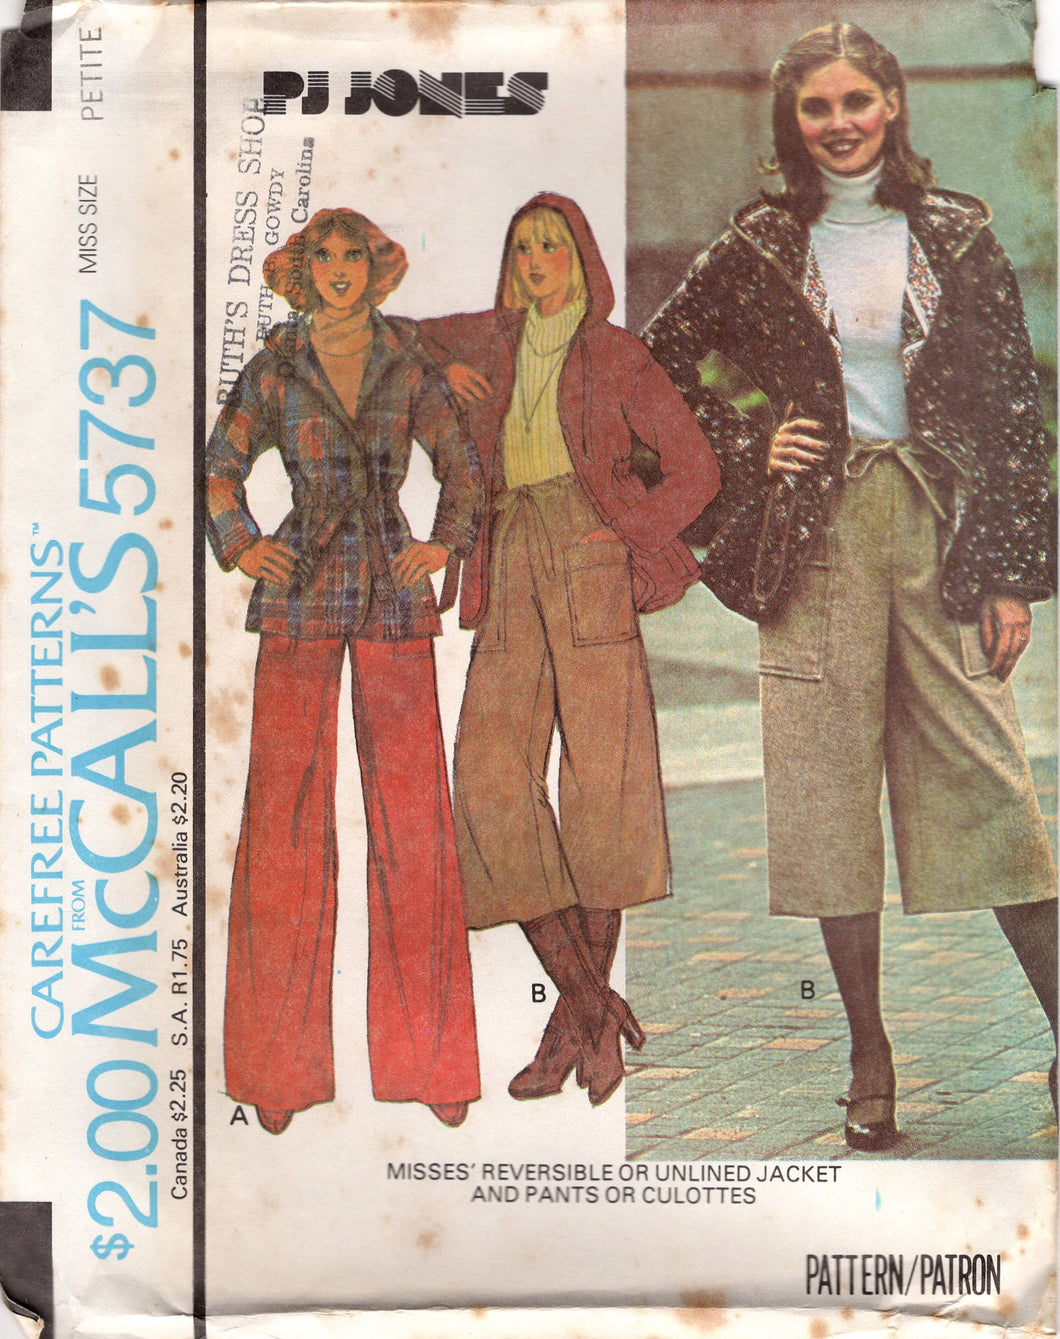 1970's McCall's Reversible or Unlined Jacket with a Hood, and Wide Leg Culottes or Pants pattern - Bust 30.5-31.5